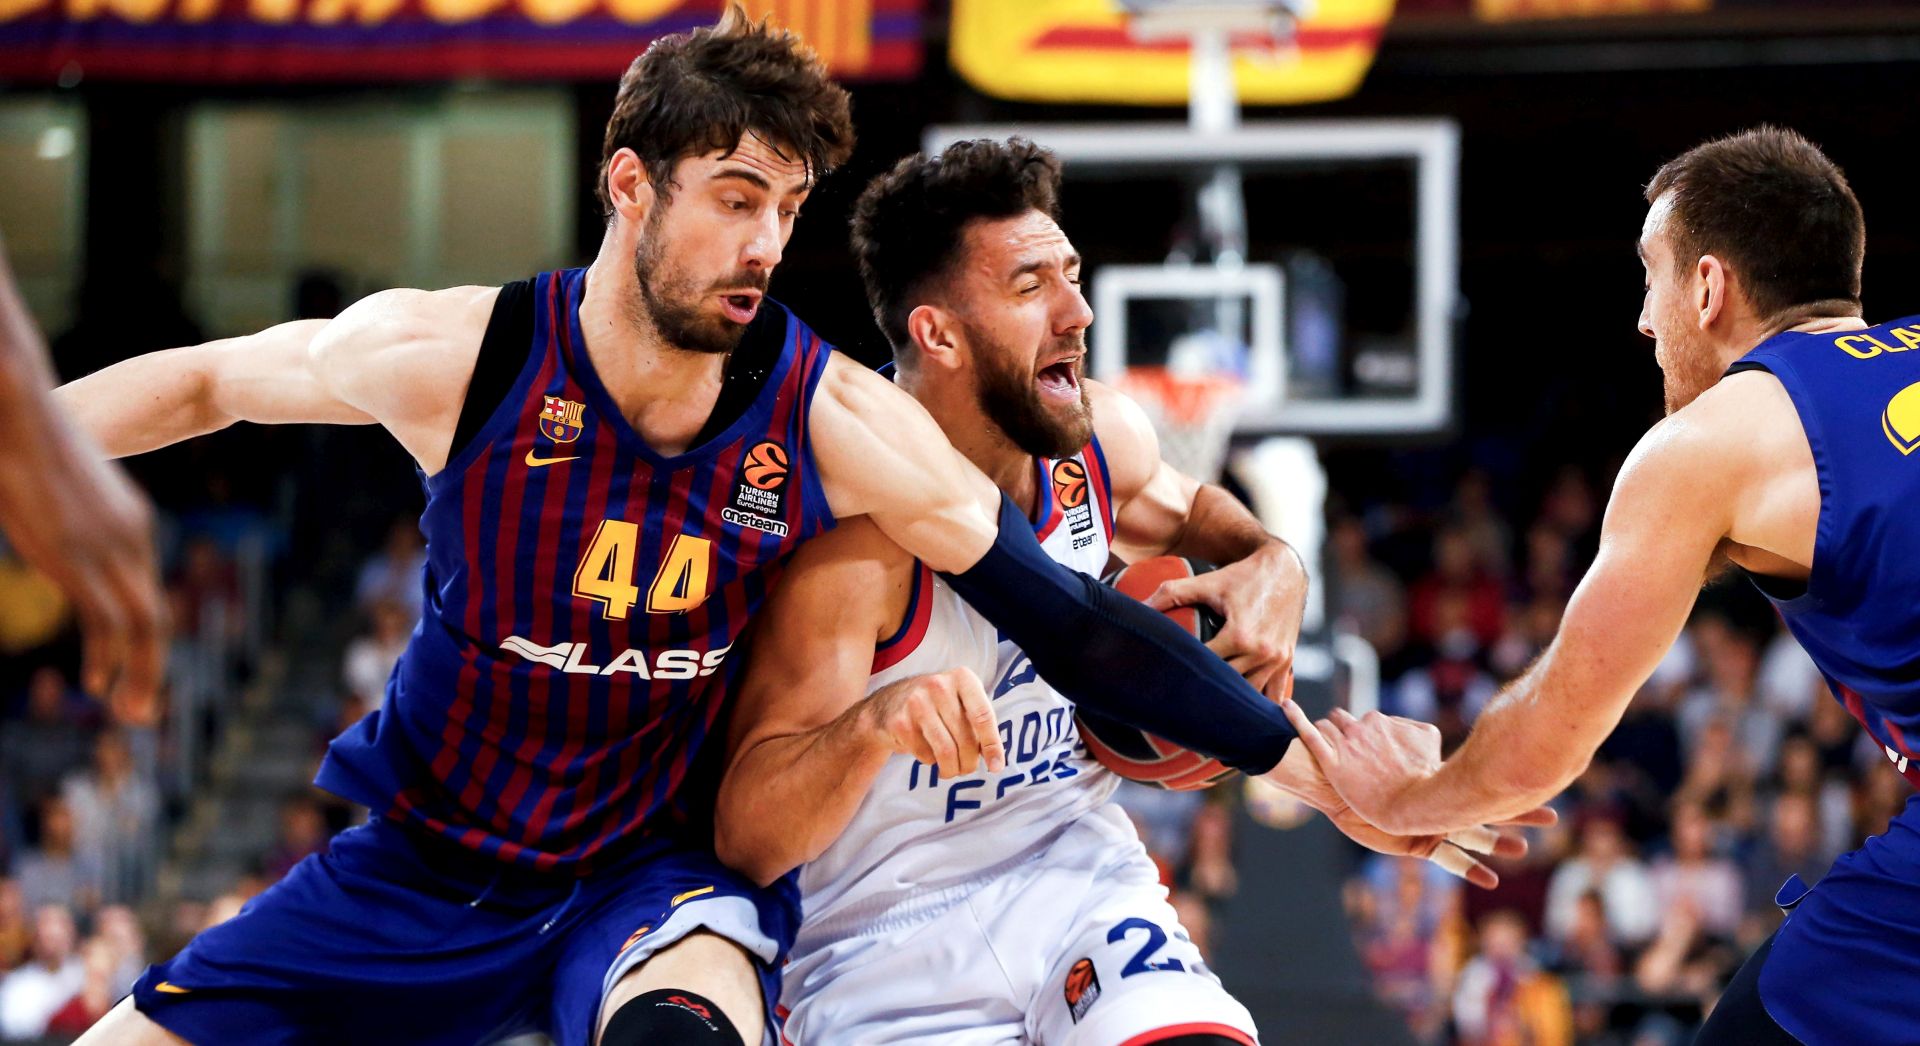 epa07526007 Anadolu Efes' Vaslije Micic (R) in action against FC Barcelona Lassa's Ante Tomic (L) during the Euroleague playoff basketball match at the Palau Blaugrana in Barcelona, Spain, 24 April 2019.  EPA/Enric Fontcuberta